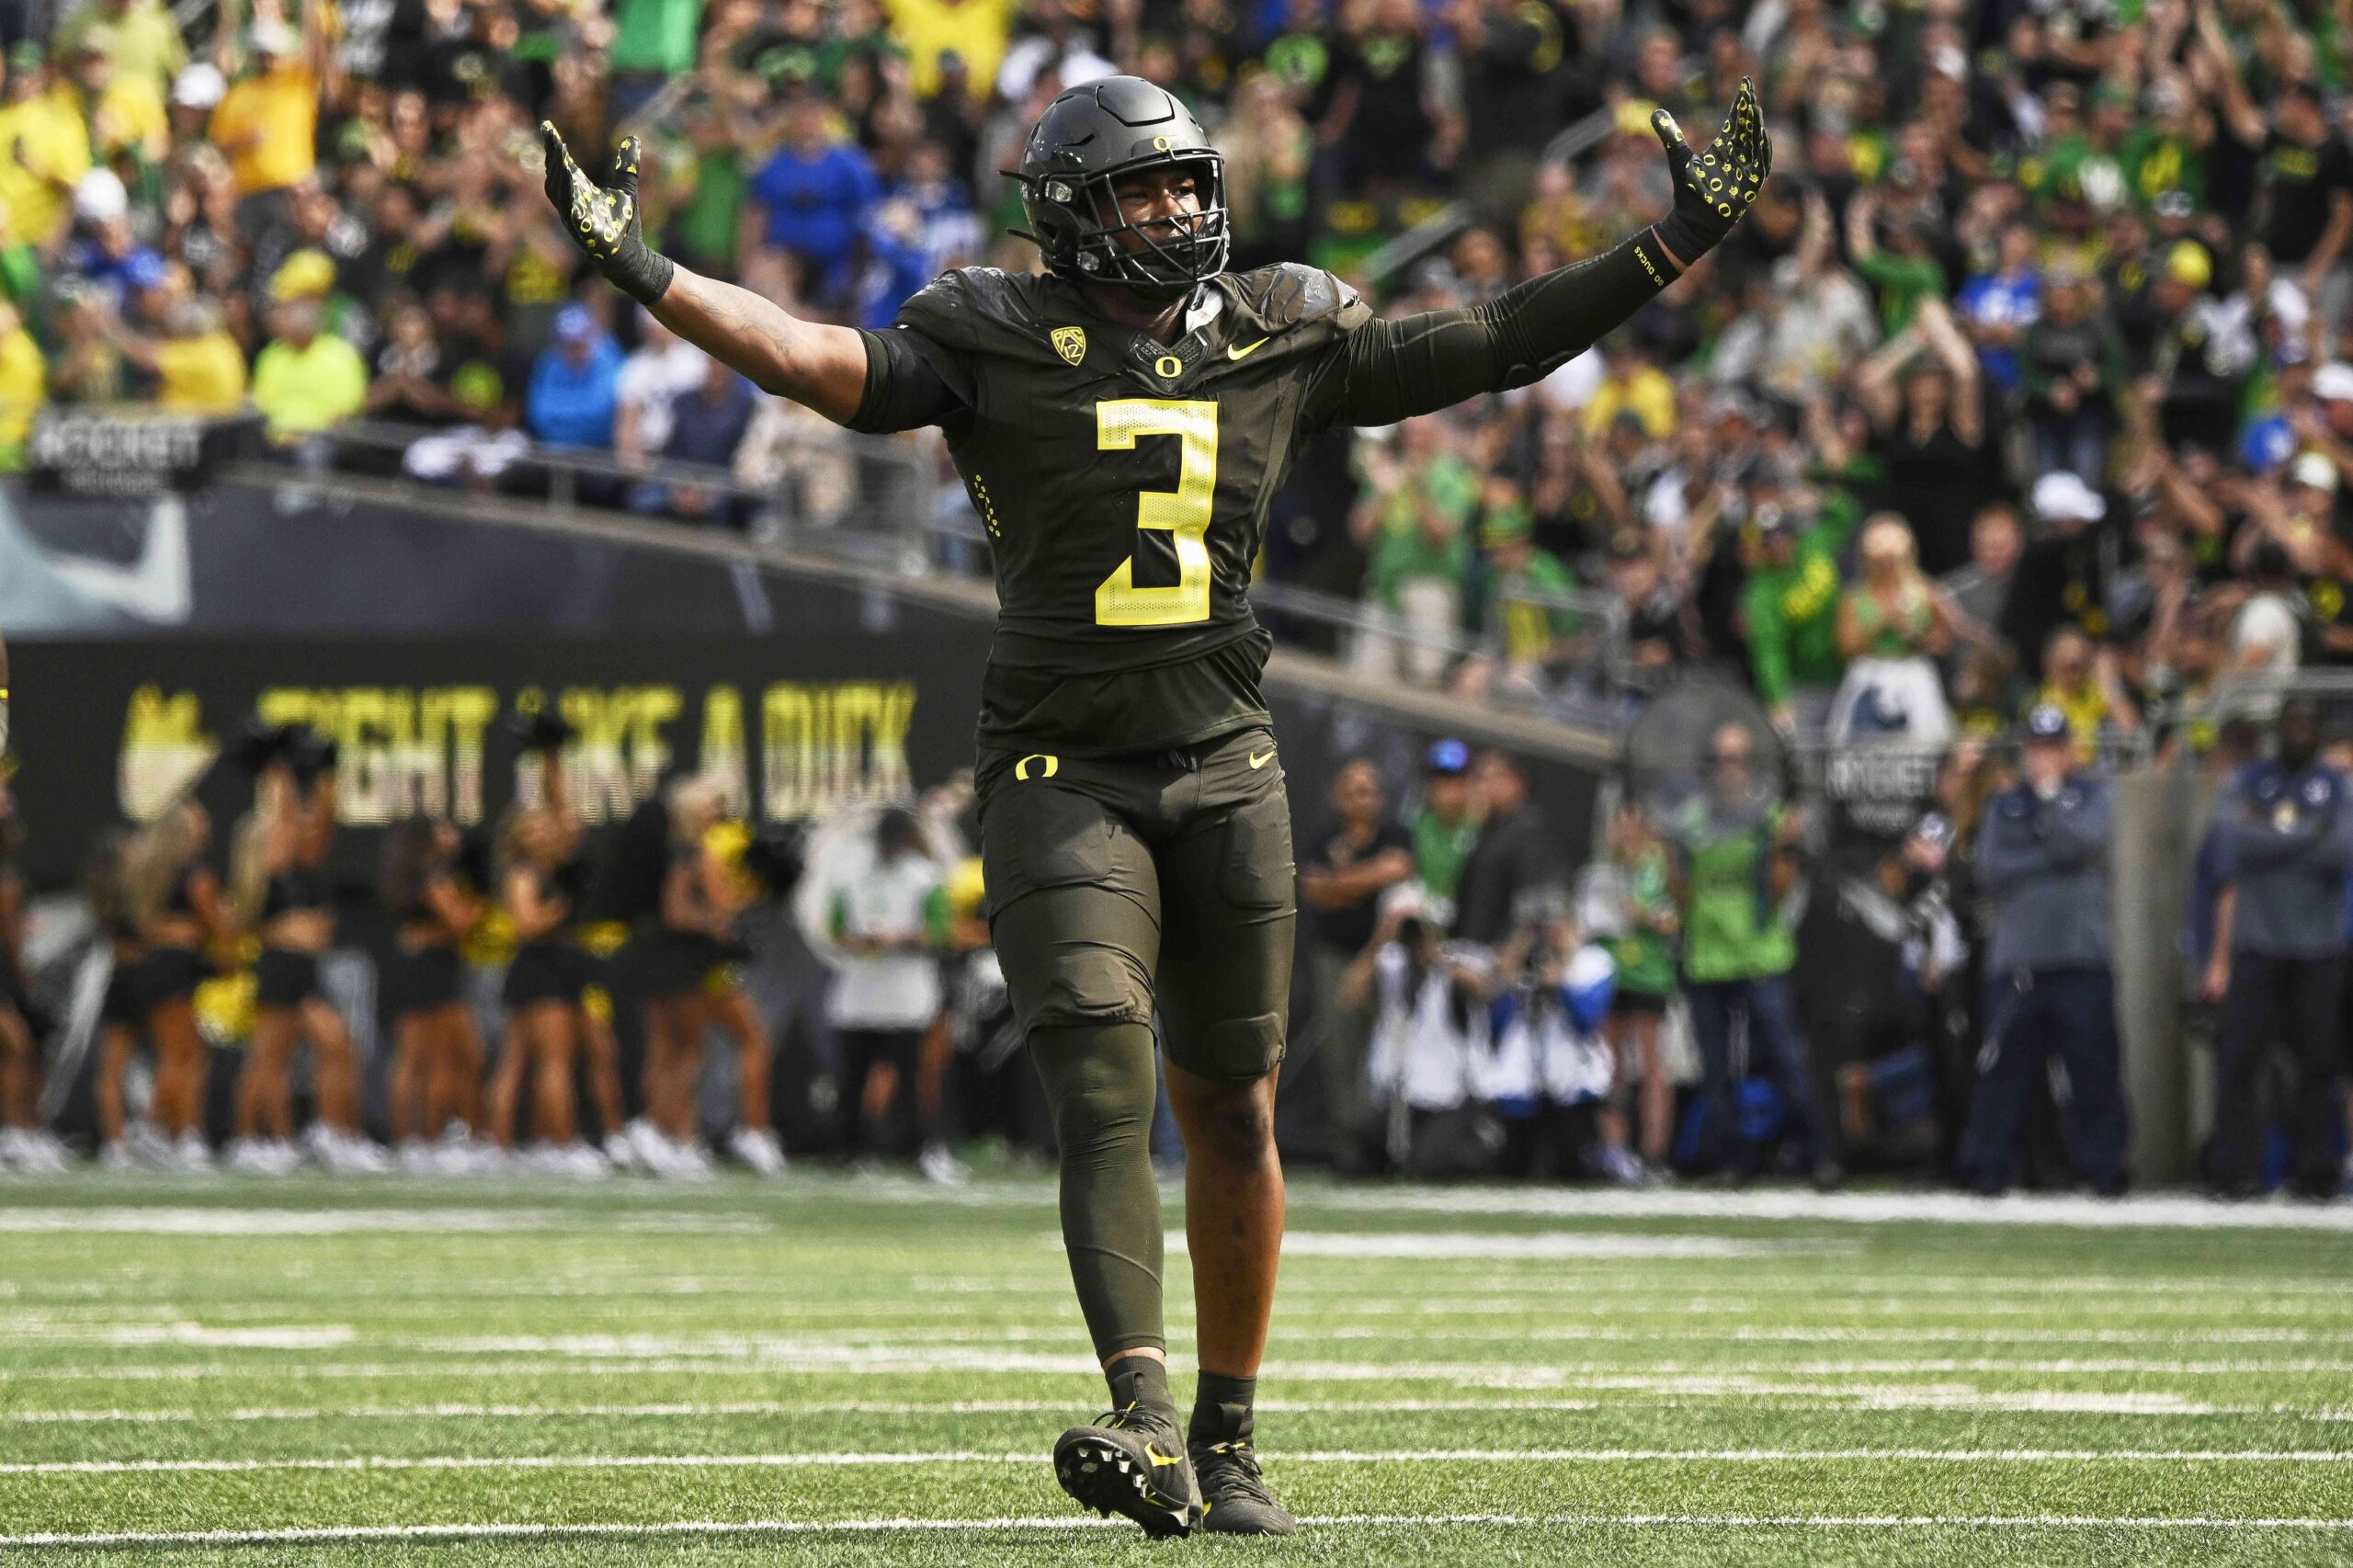 Oregon football's color schedule brings excitement to team and